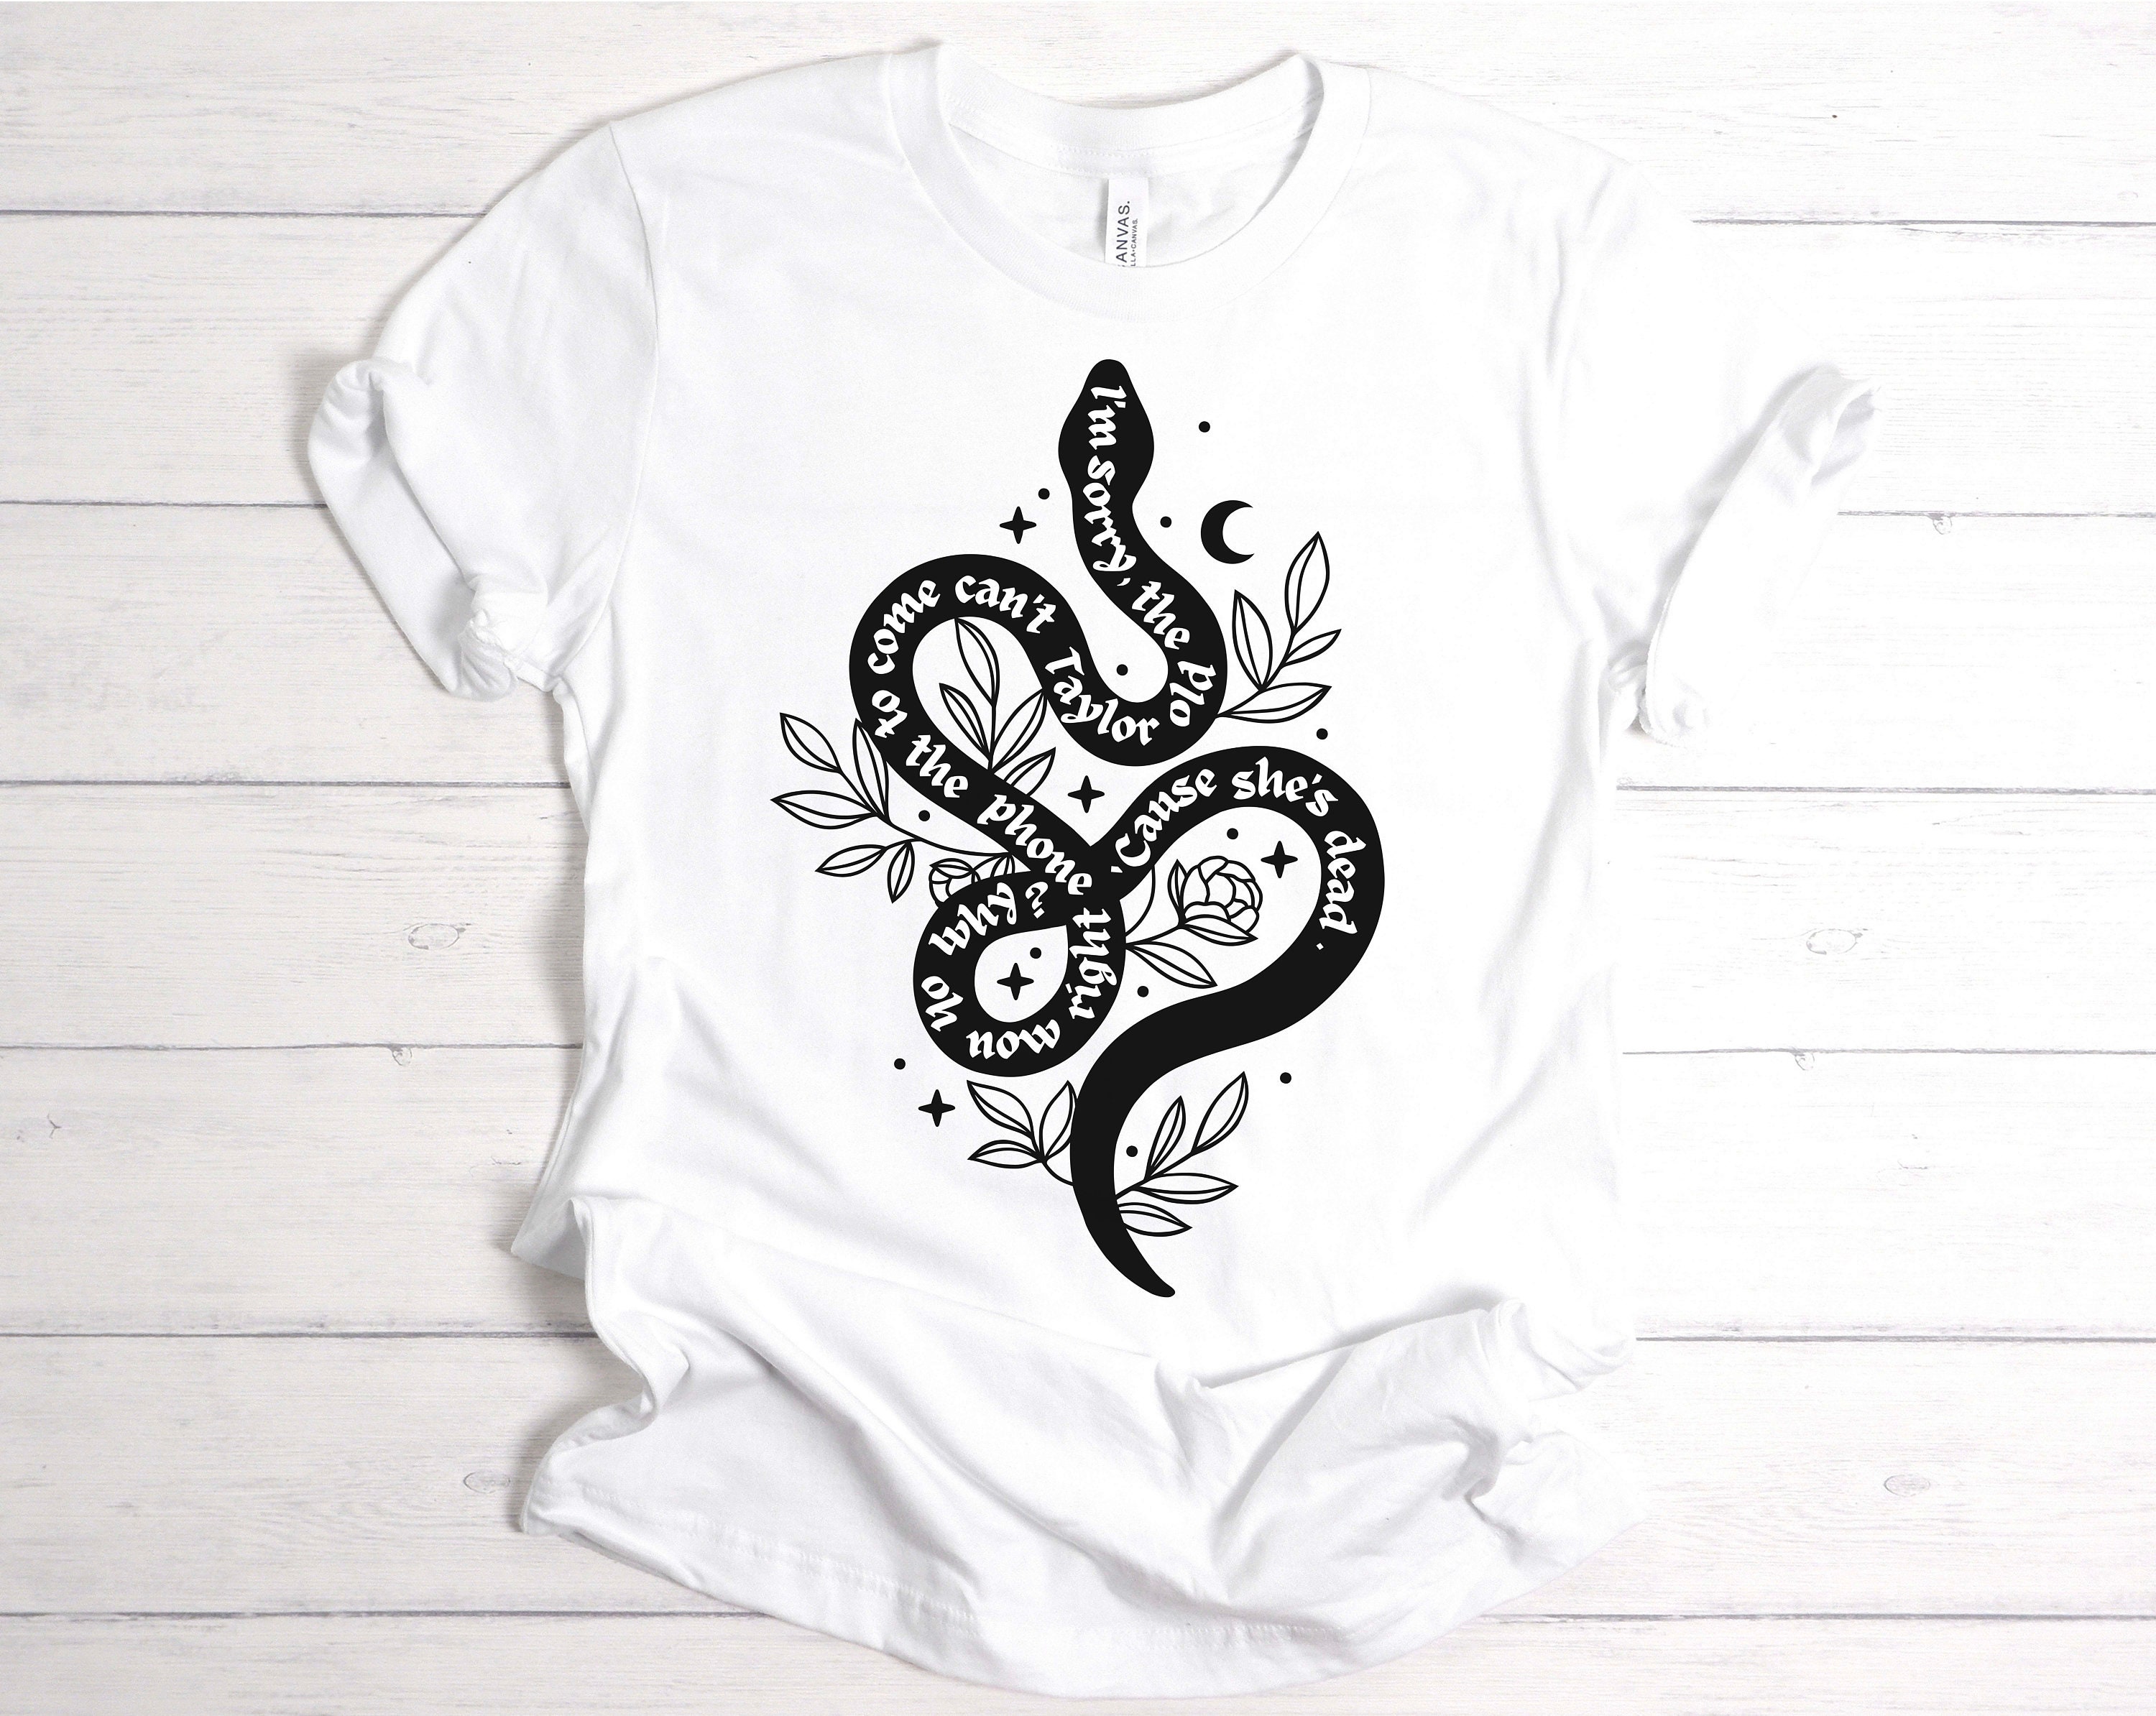 Reputation Snake Look What You Made Me Do The Old Taylor Can’t Come To The Phone Right Now Trending Unisex Shirt